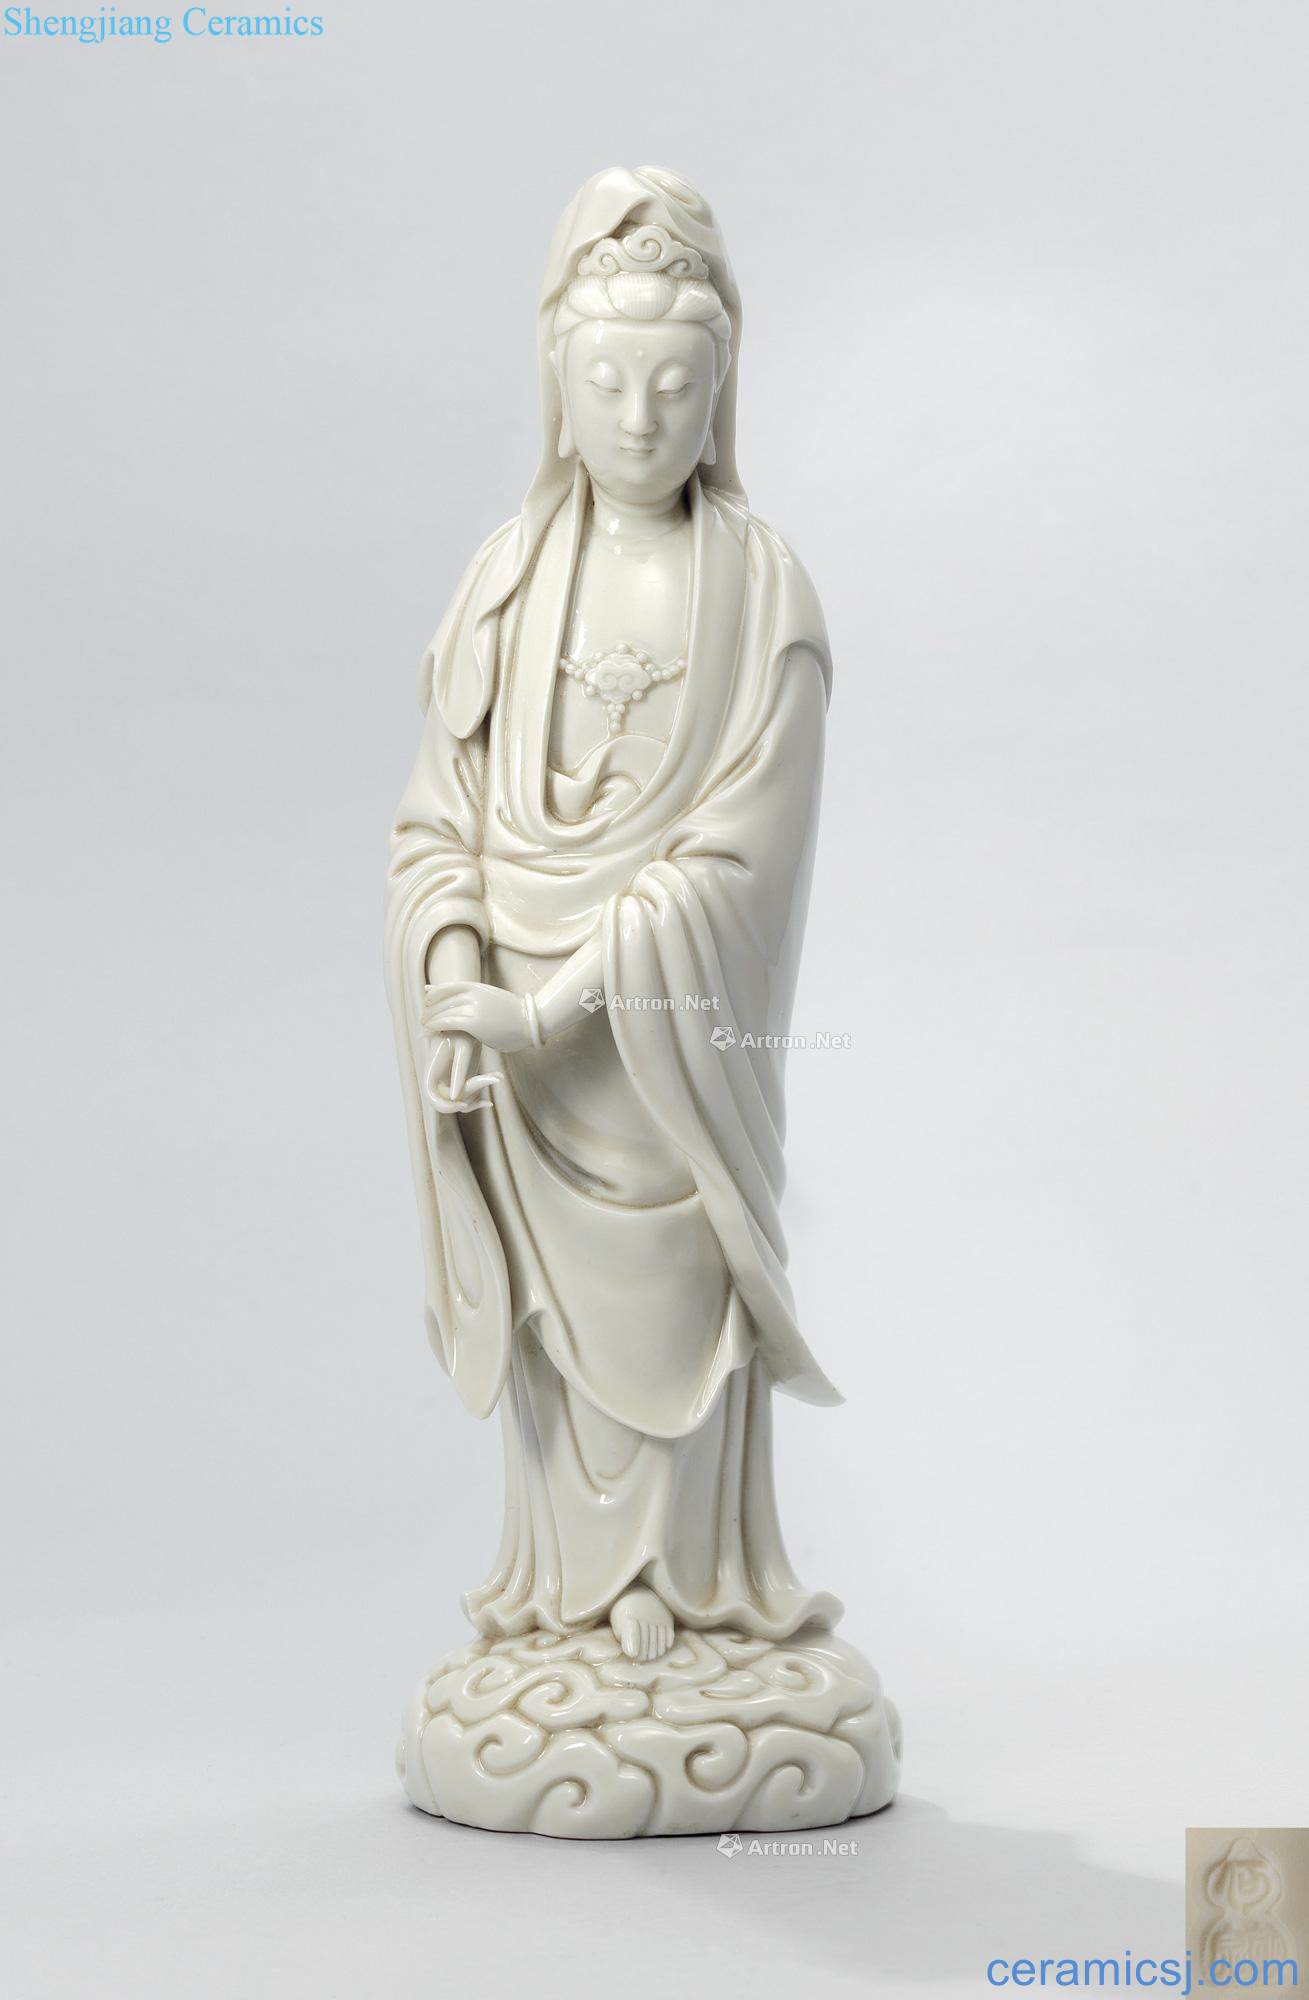 The late Ming dynasty dehua white glaze guanyin stands resemble